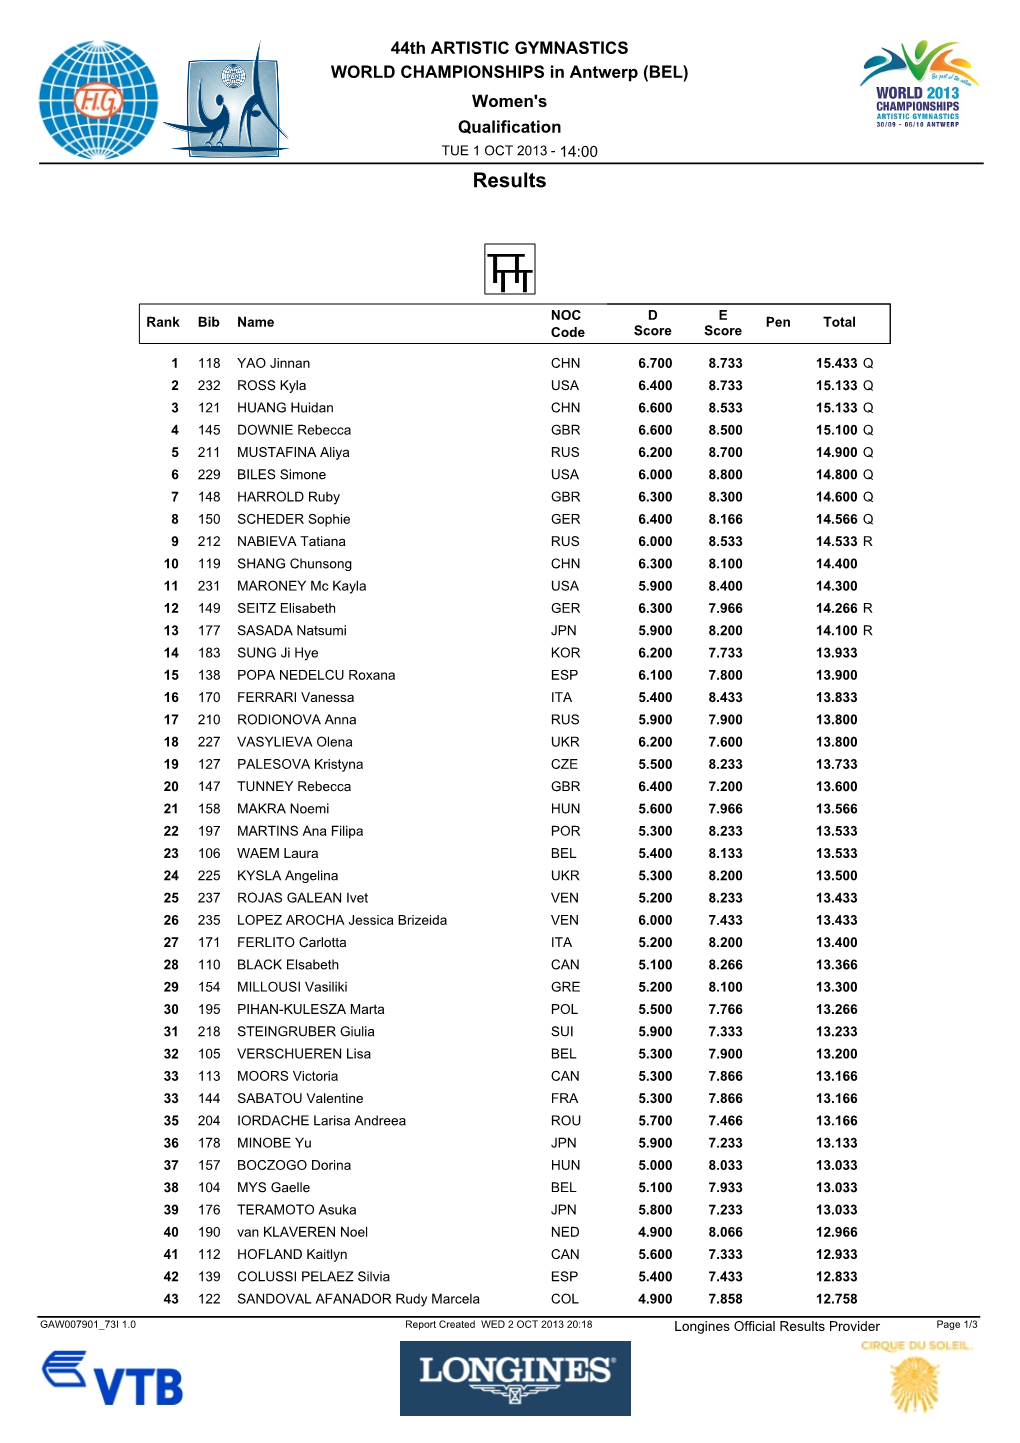 Uneven Bars Results